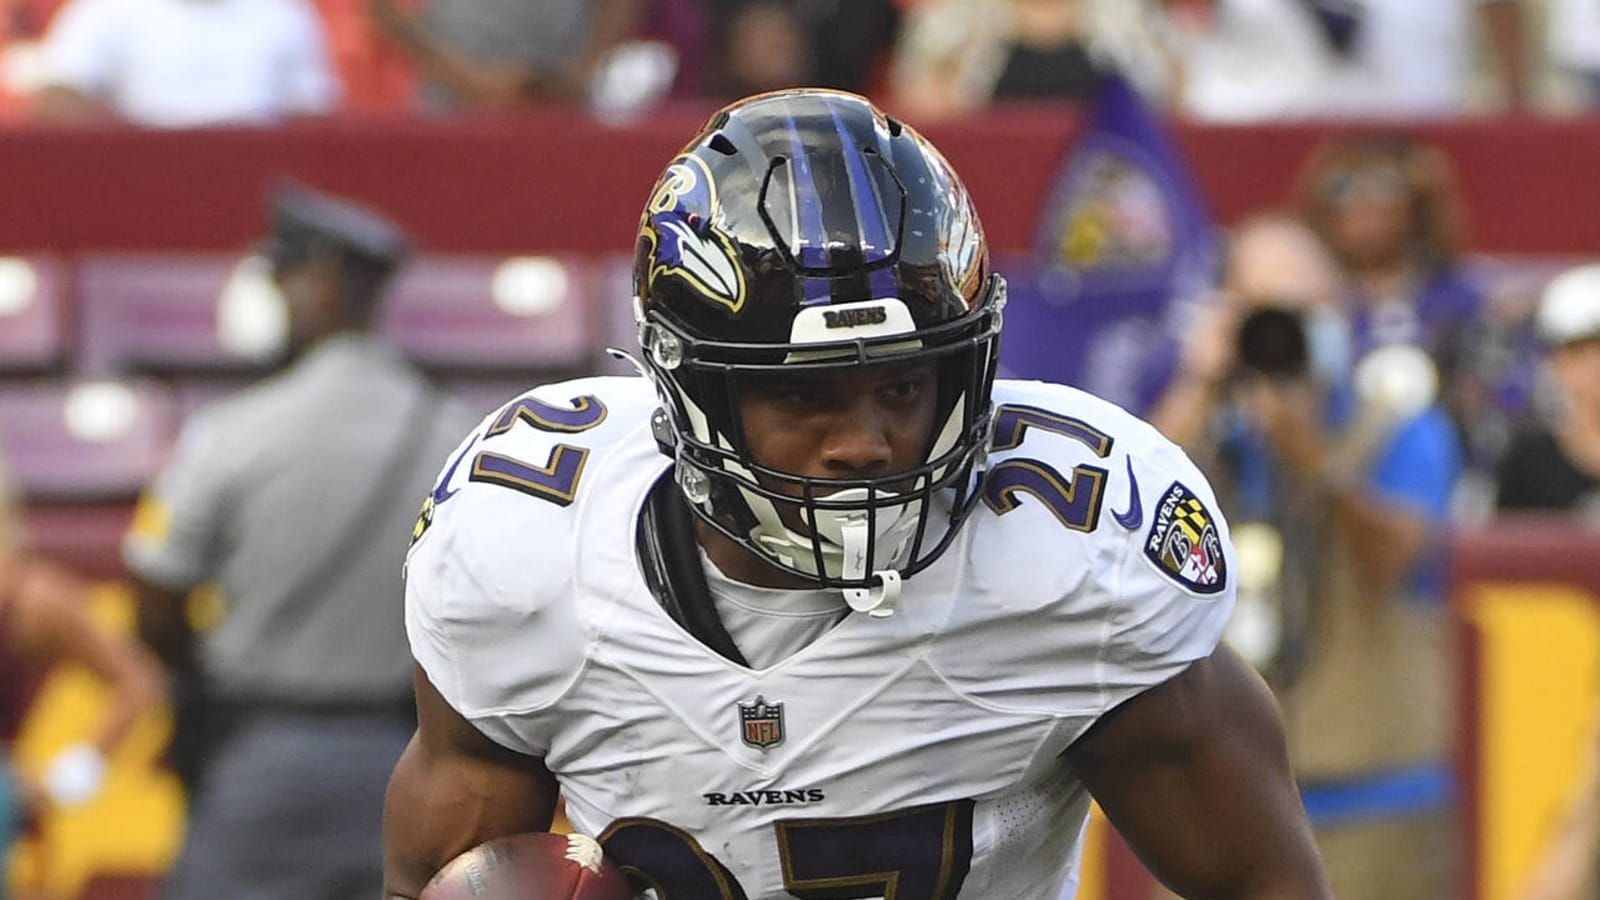 Ravens RB hoping to play out career in Baltimore